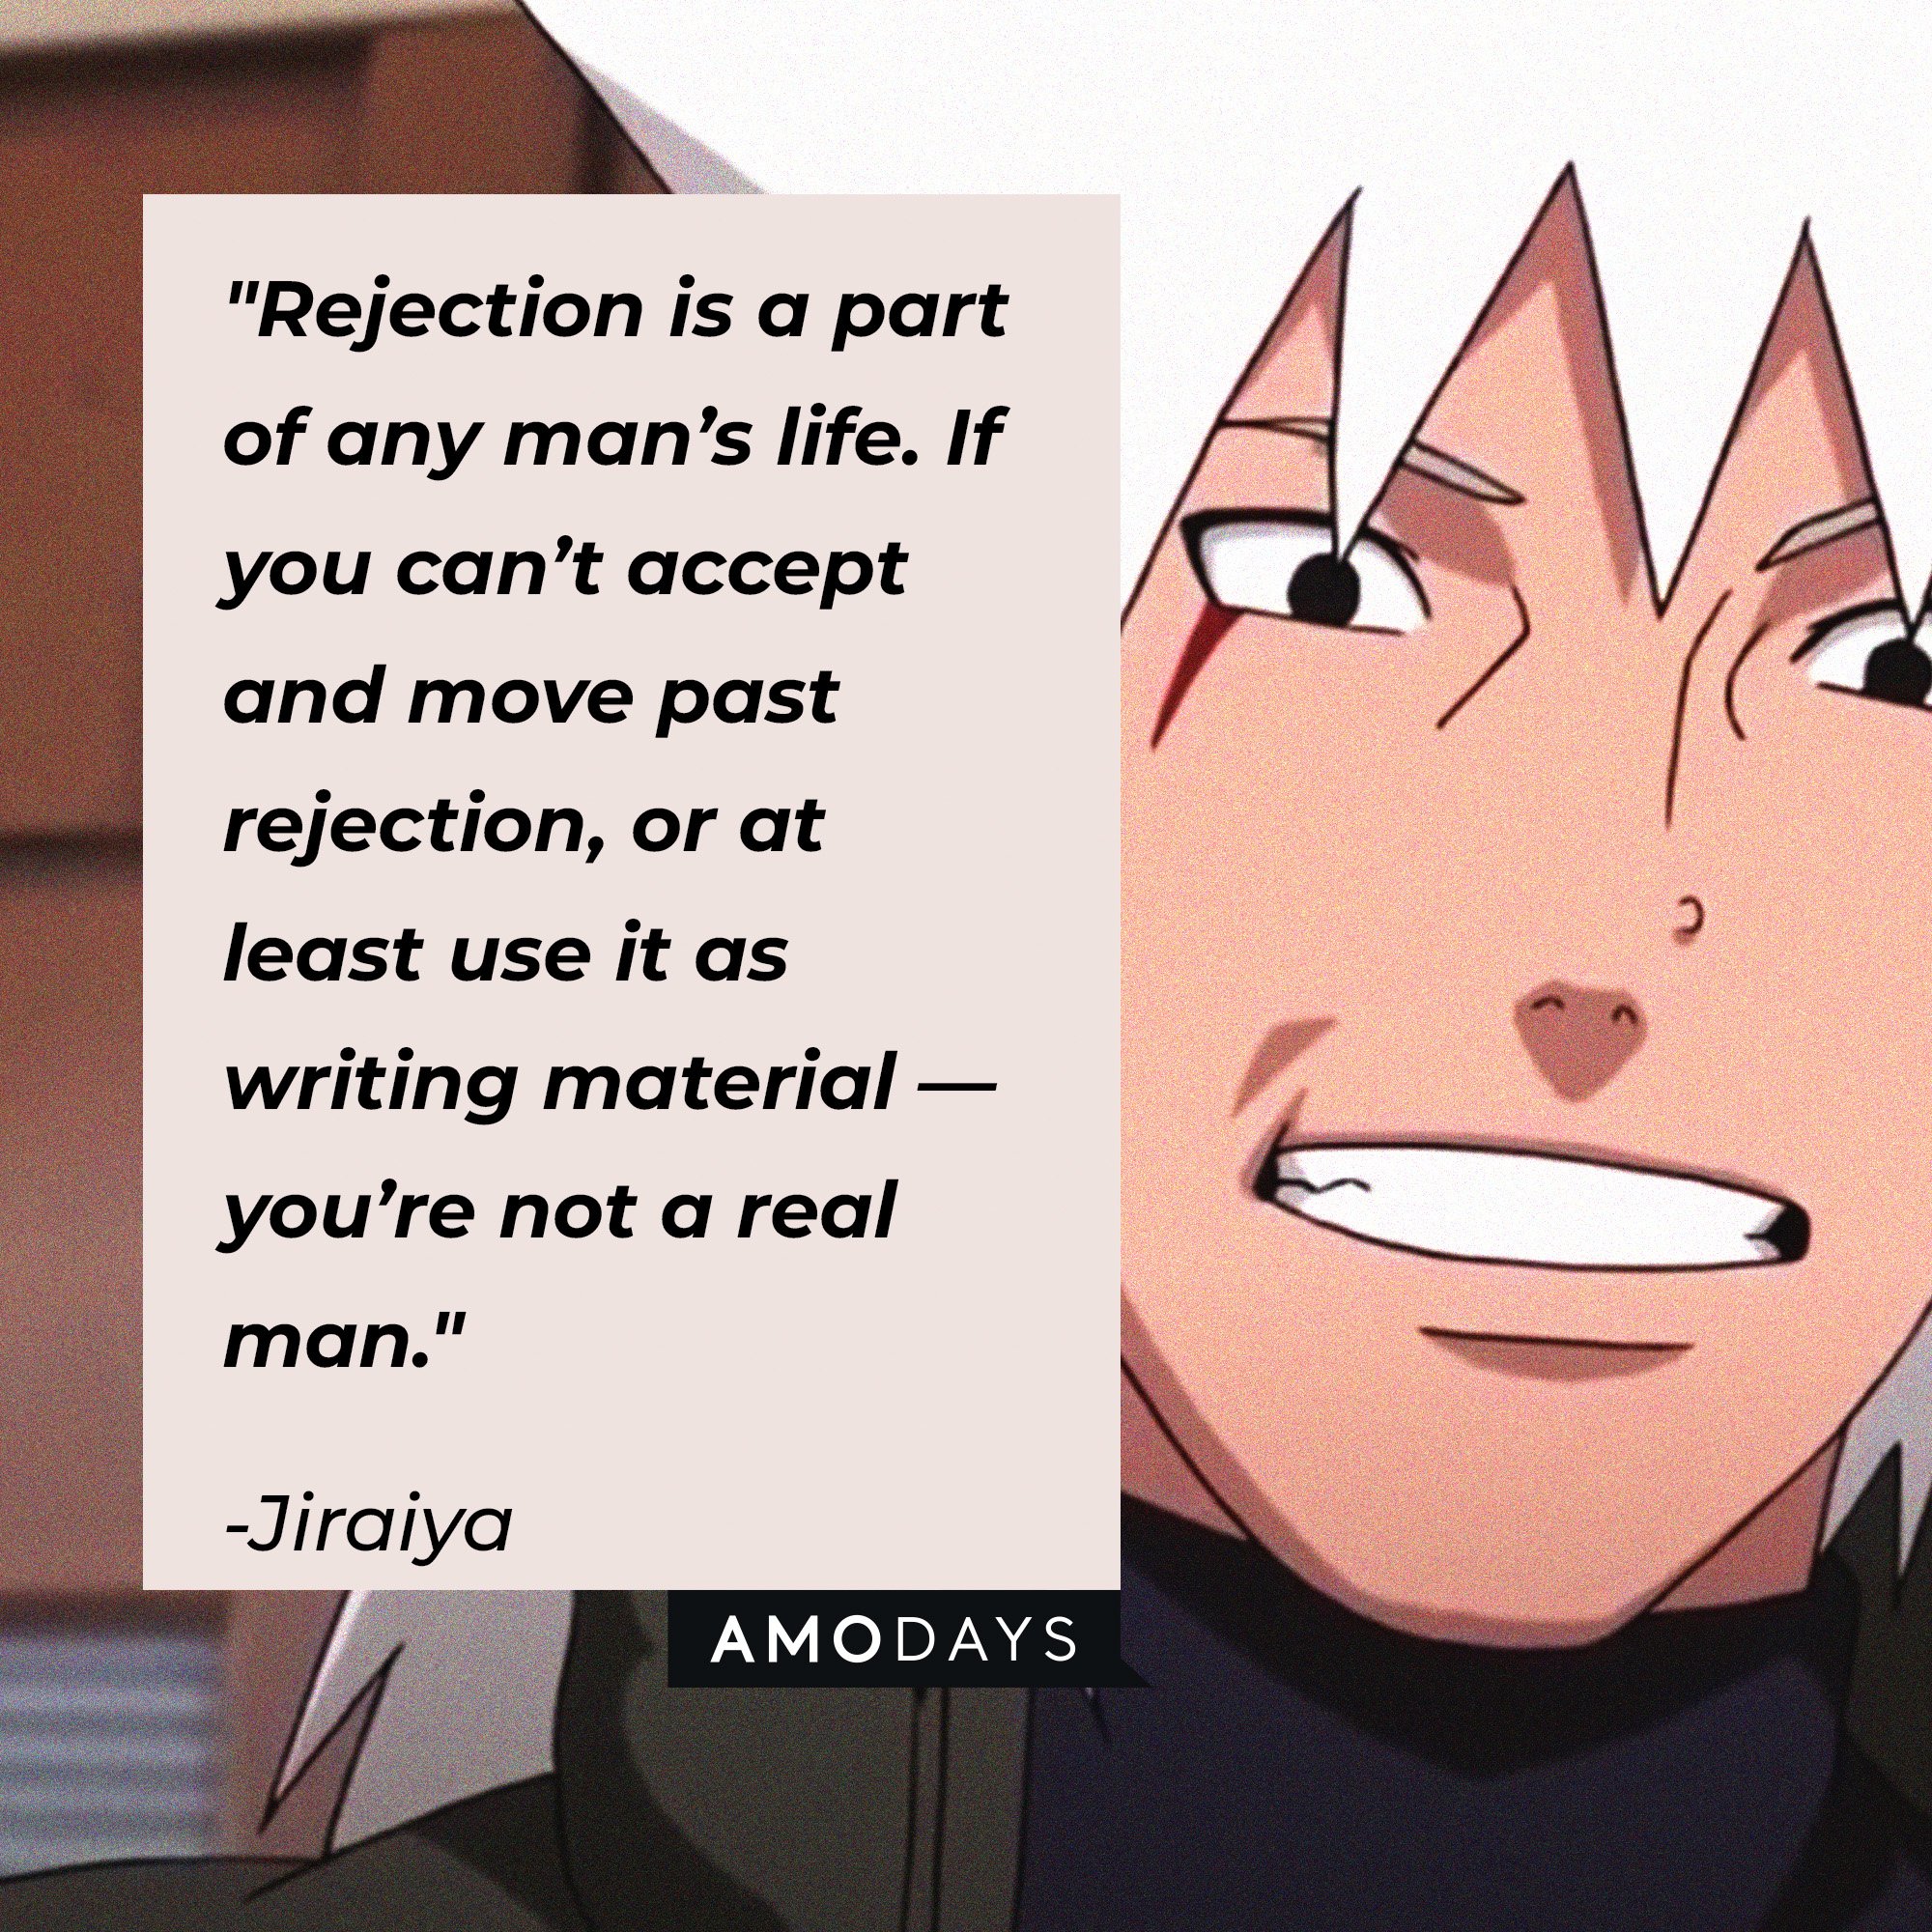 Jiraiya's quote: "Rejection is a part of any man’s life. If you can’t accept and move past rejection, or at least use it as writing material — you’re not a real man." | Image: AmoDays